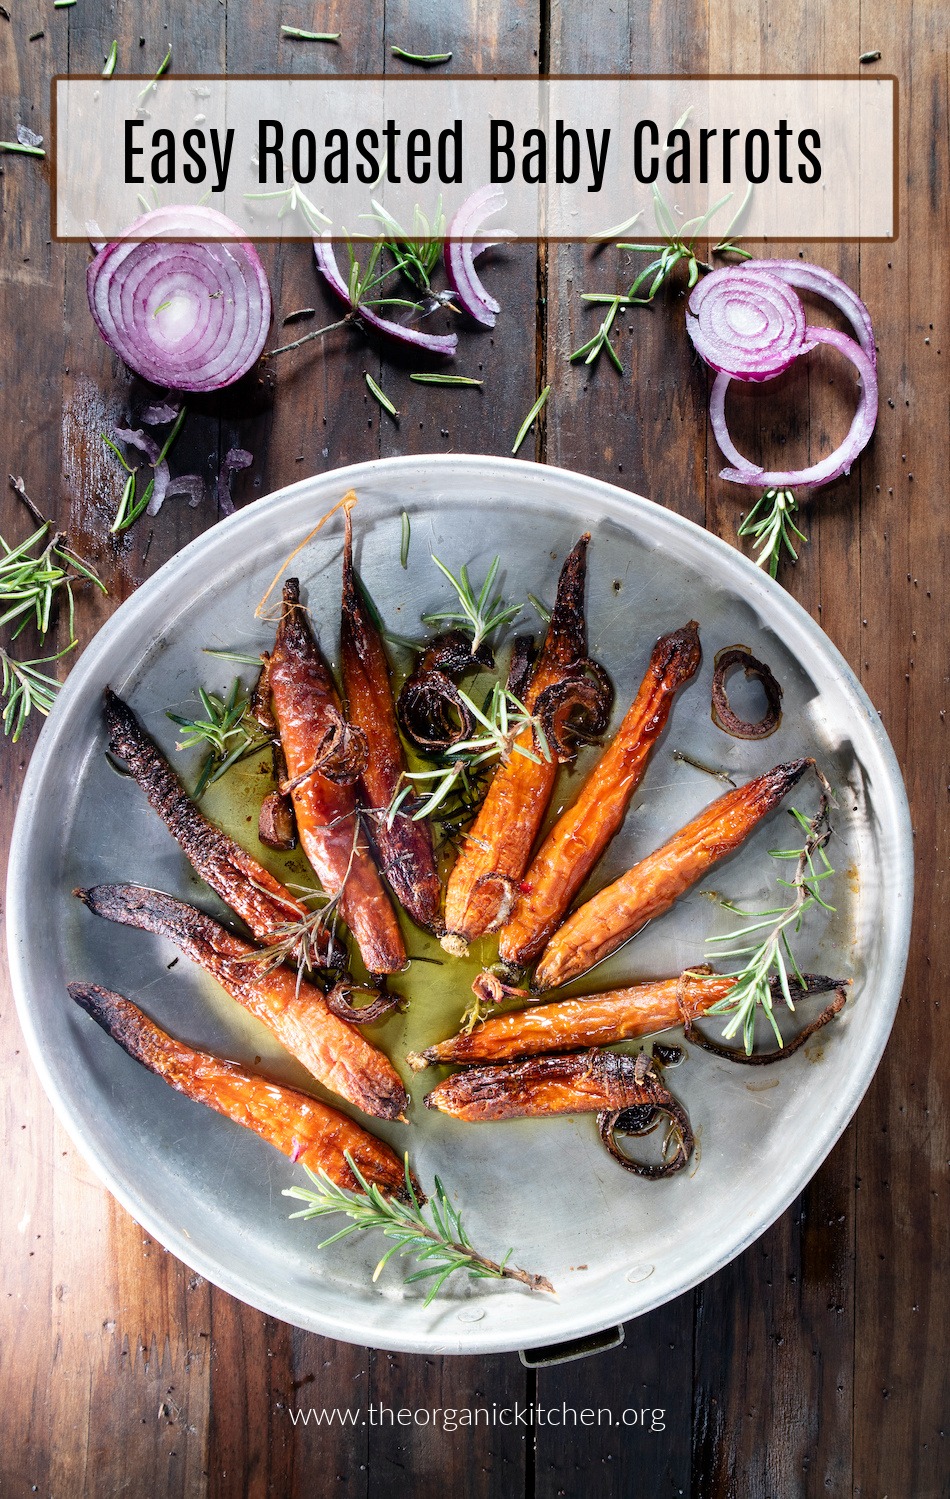 Easy Roasted Baby Carrots on blue plate set on wood table